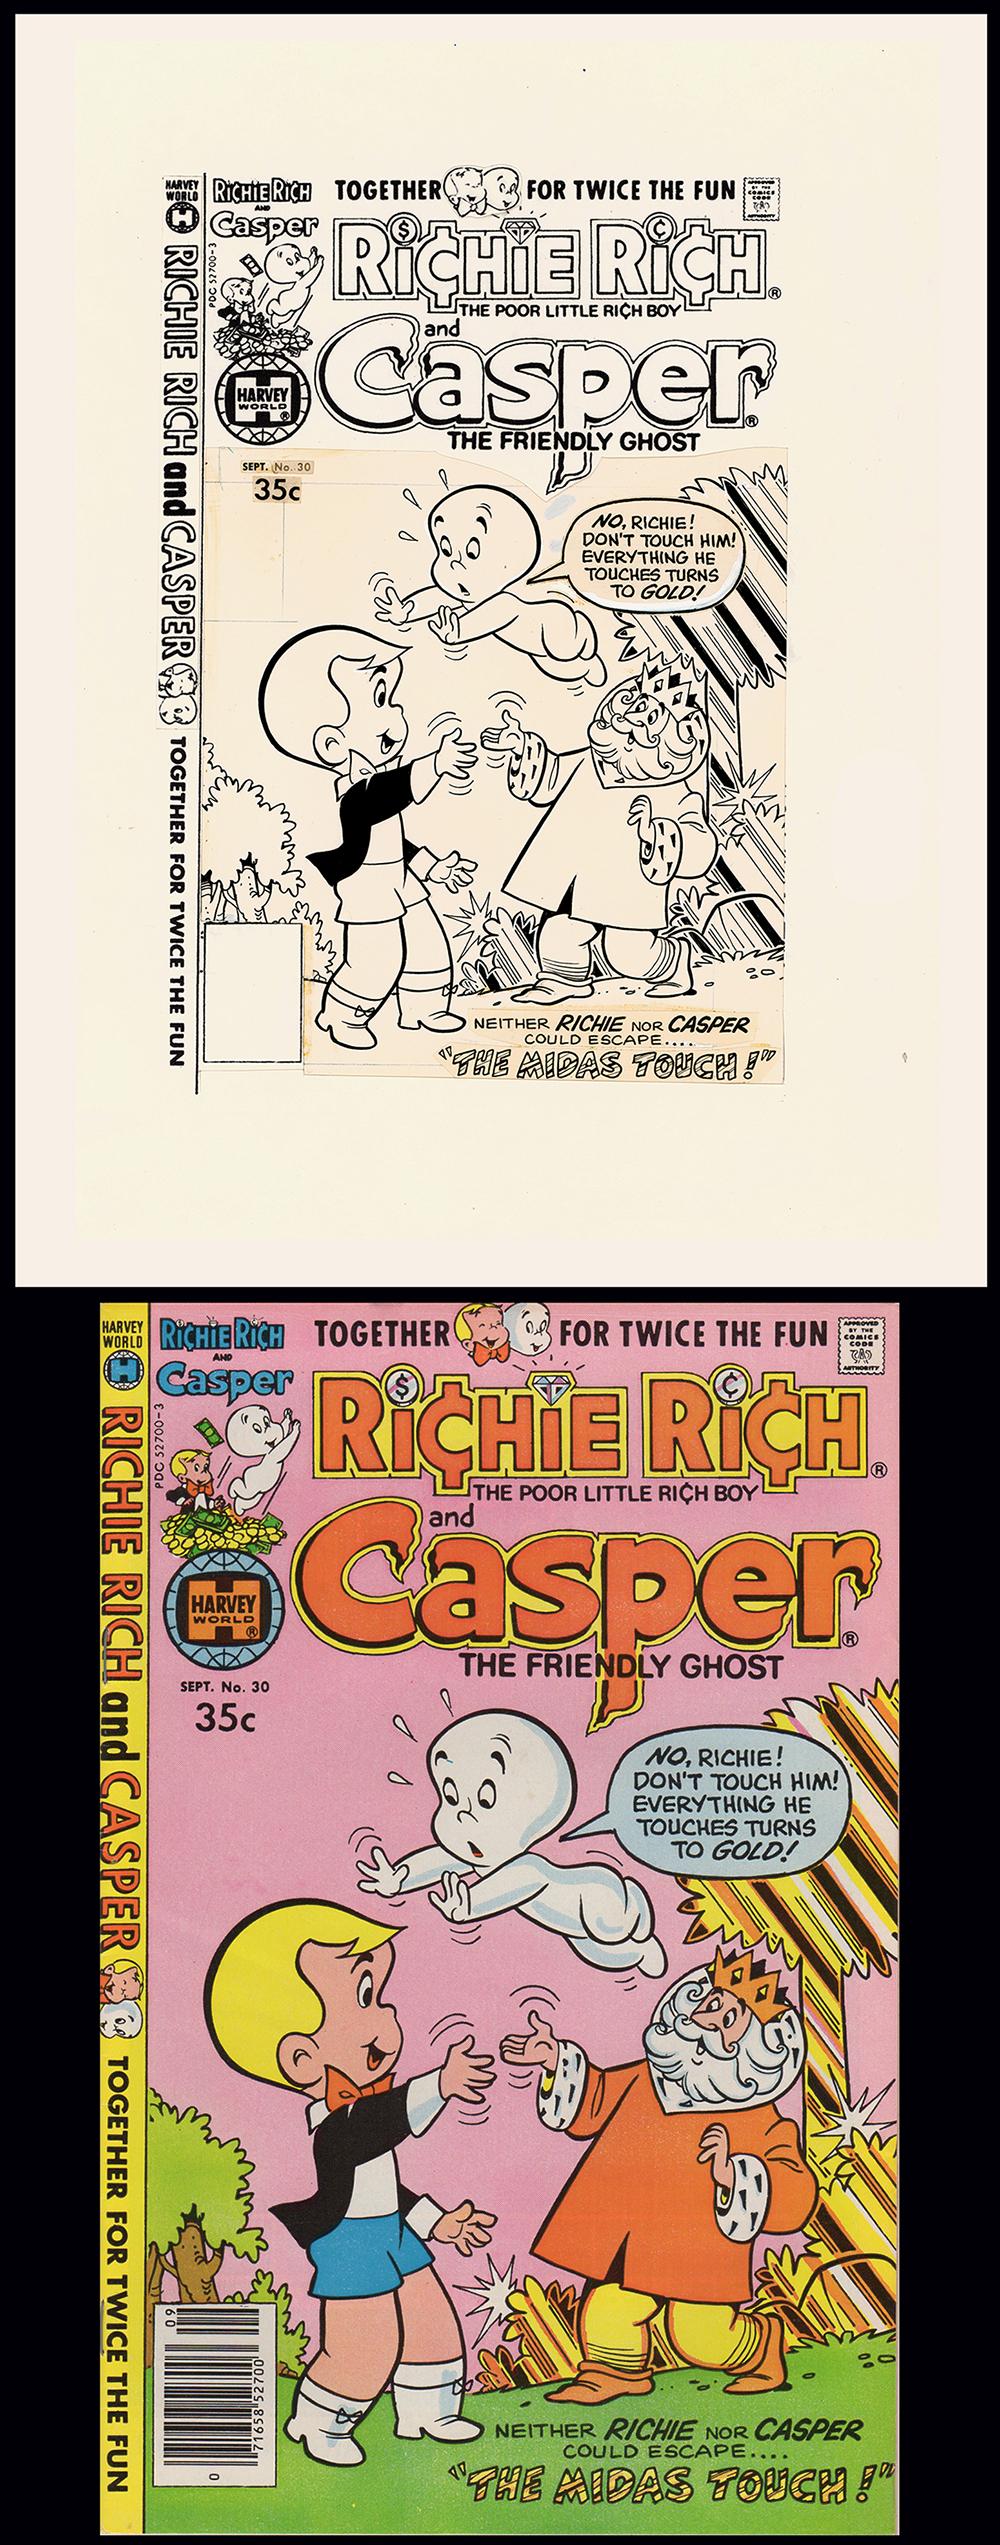 Image: Richie Rich and Casper the Friendly Ghost #30 Cover art by Warren Kremer